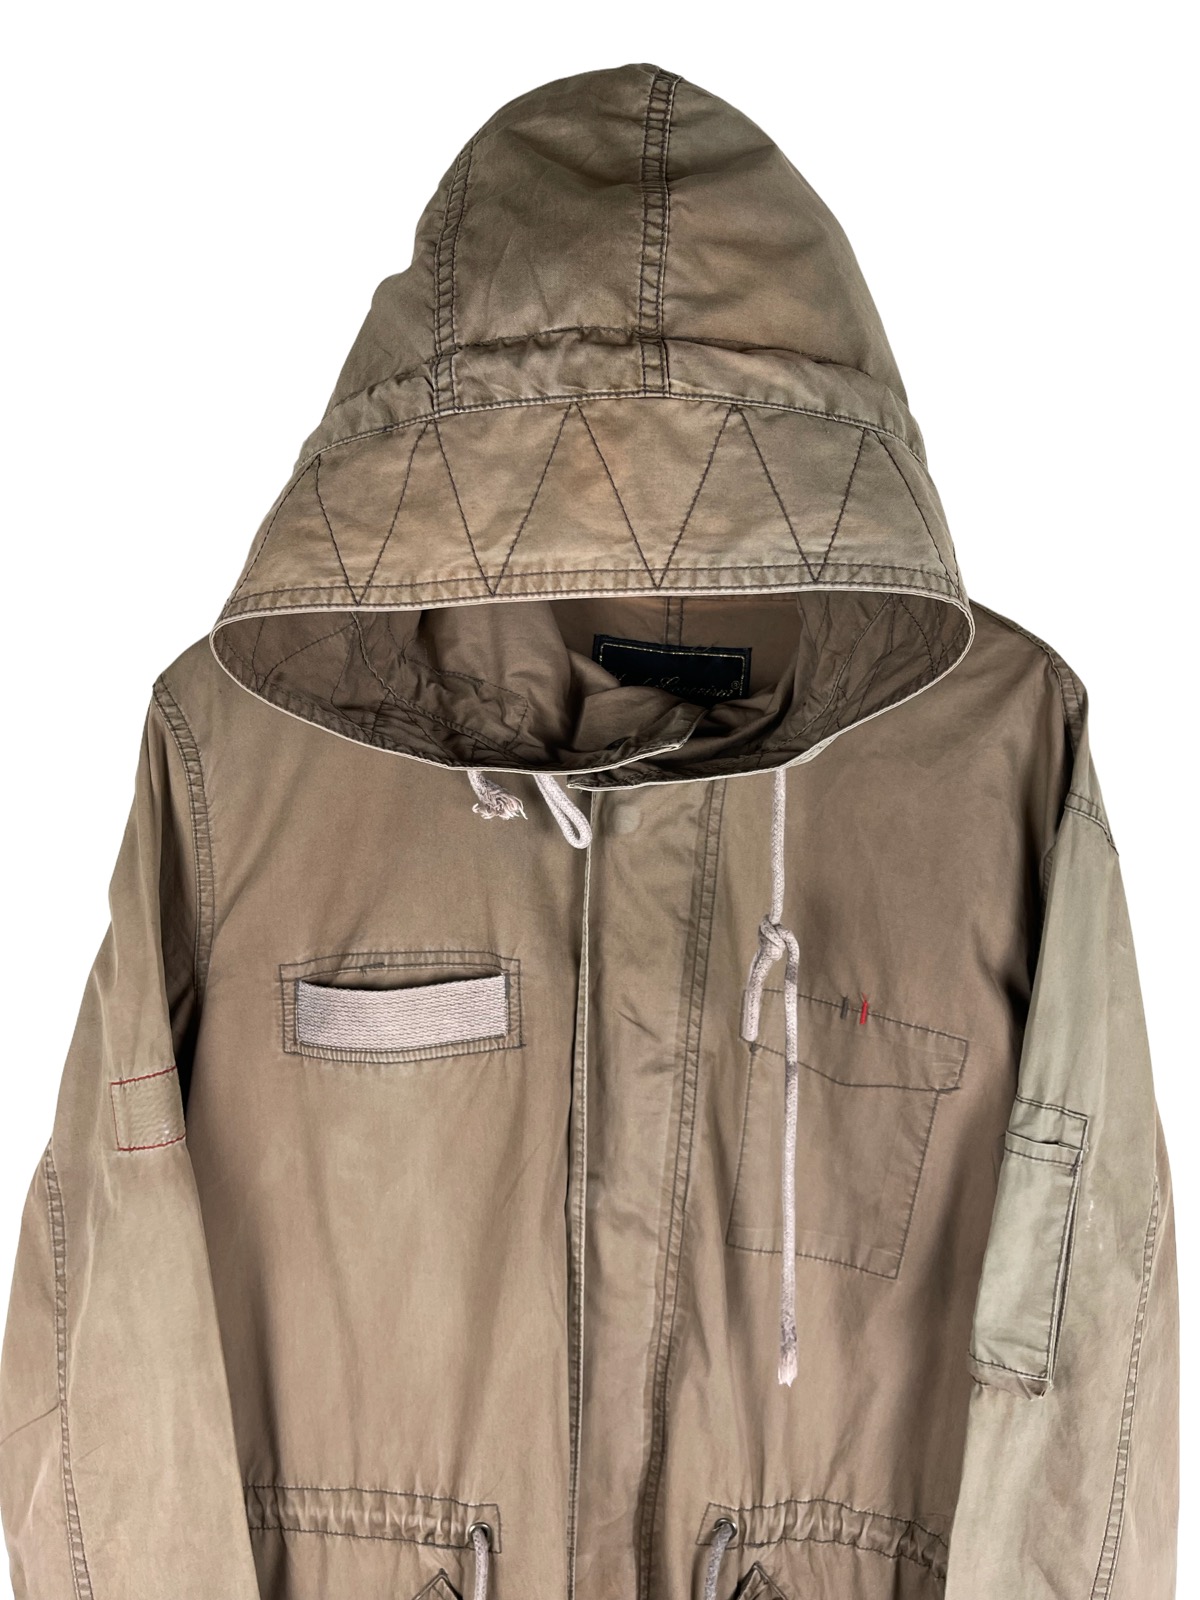 Undercoverism Sun Faded Hoodie Fishtail Parka size 2 - 4